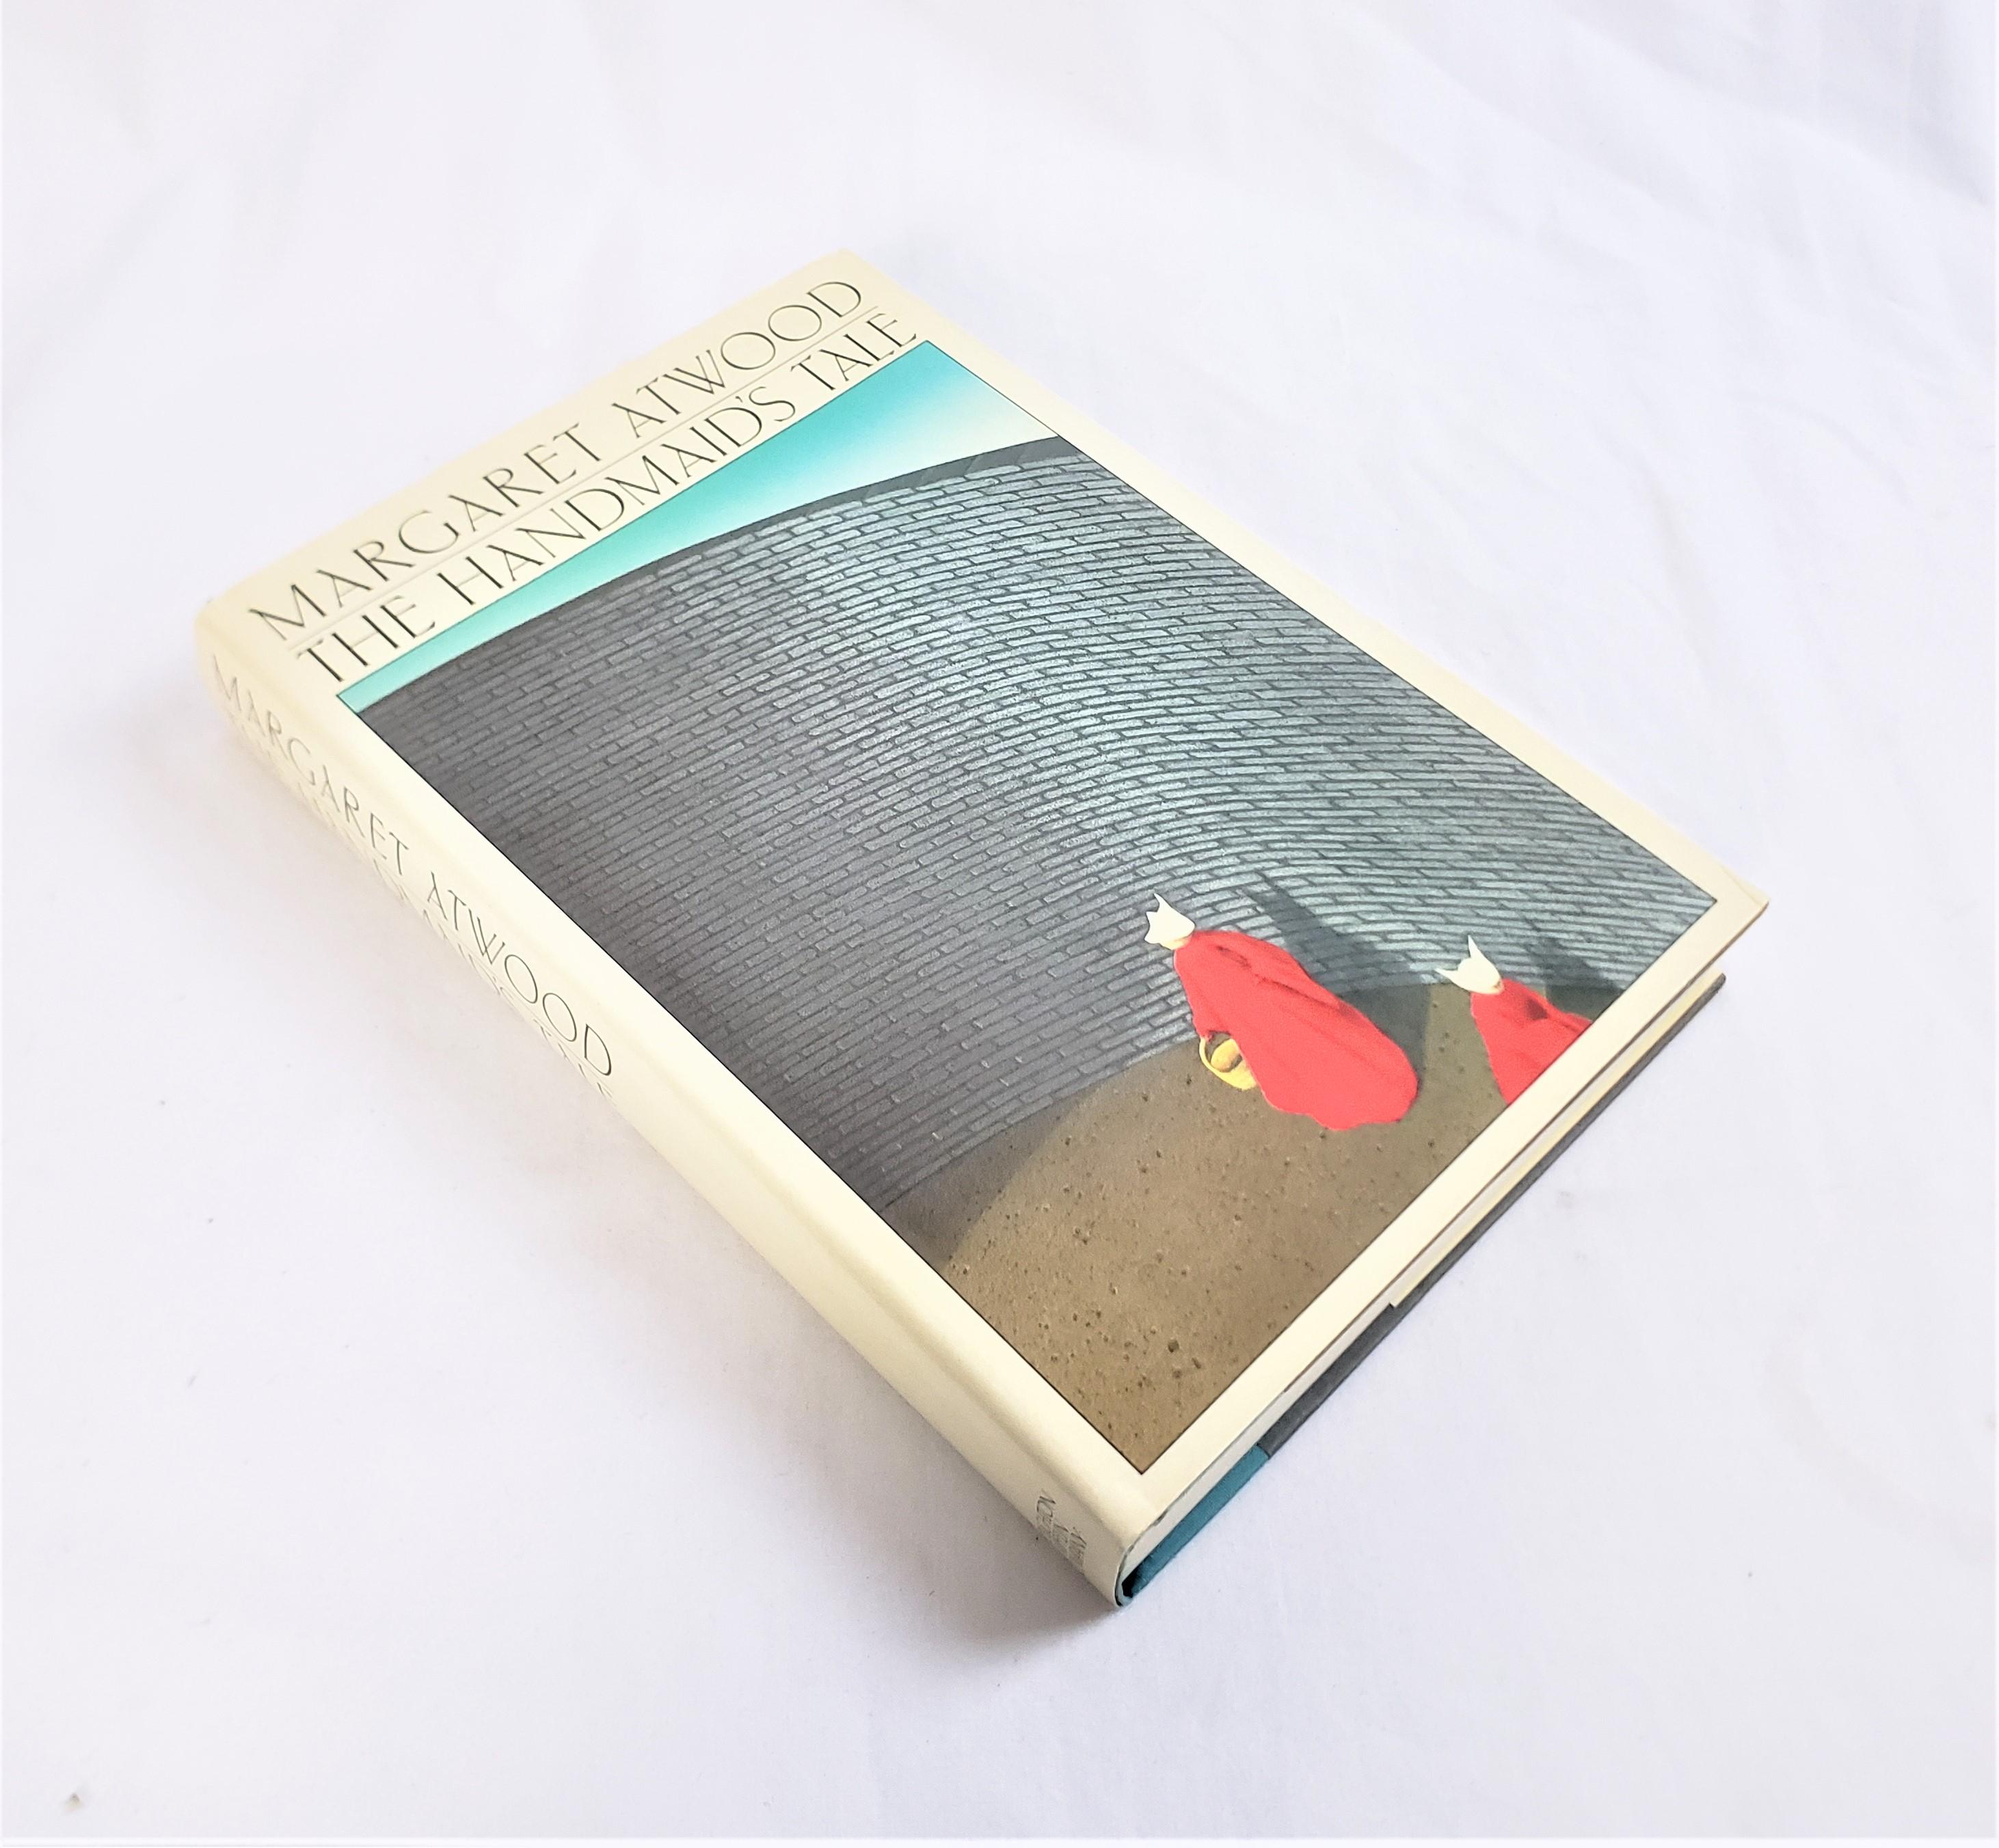 Paper Margaret Atwood Autographed 'The Handmaid's Tale' 1986 O.W. Toad Ltd. U.S.A. For Sale